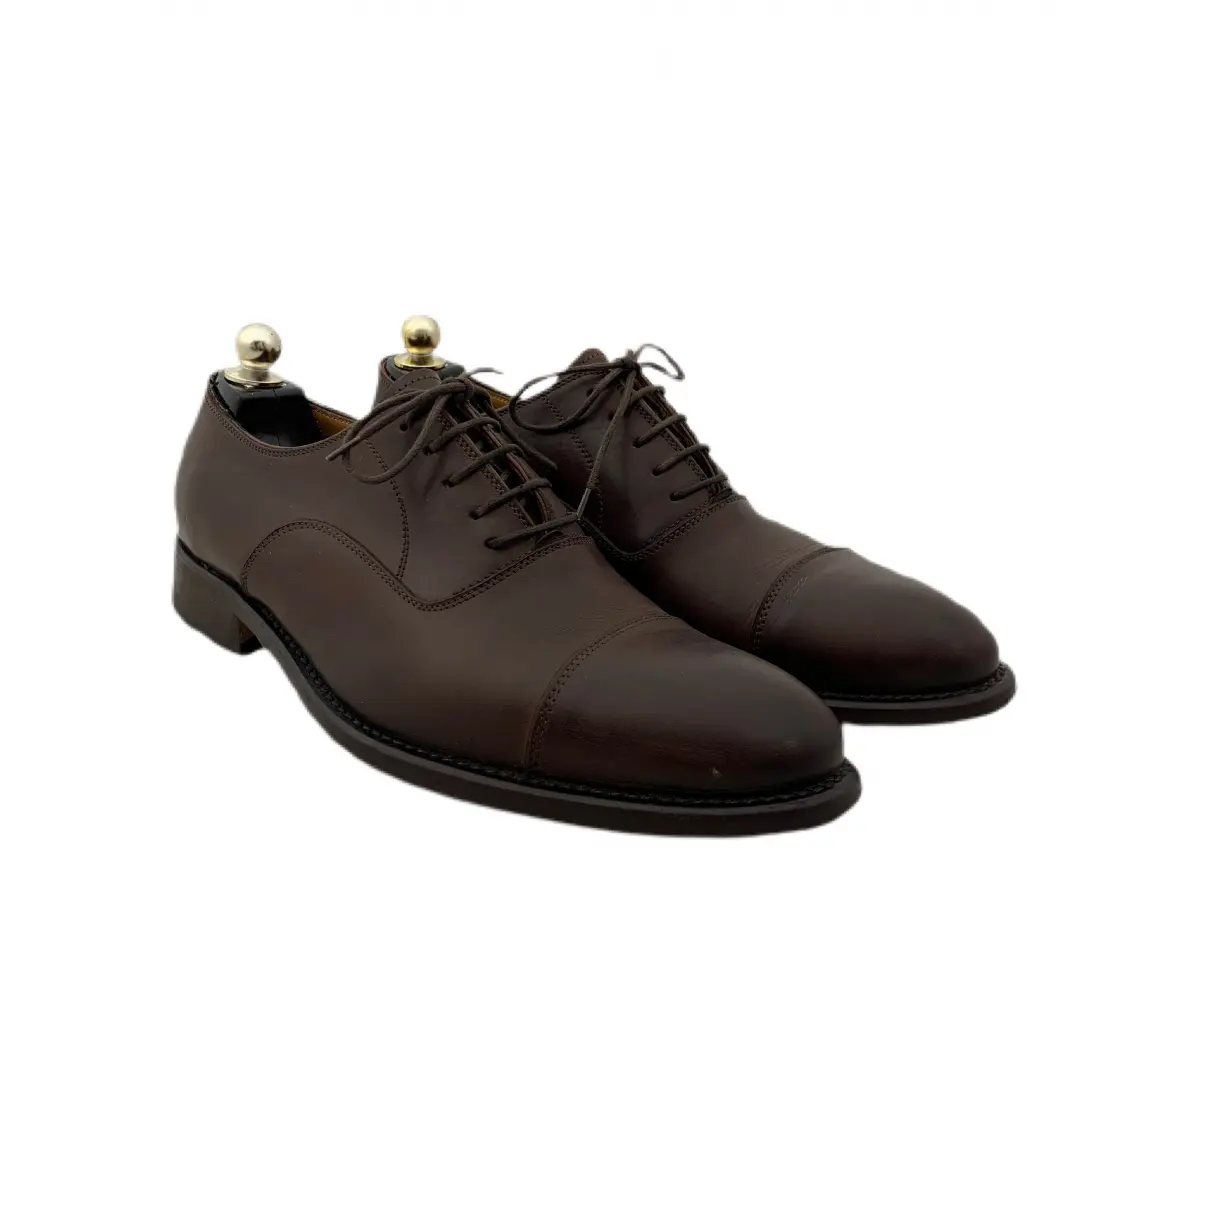 Buy sartoriale Leather lace ups online